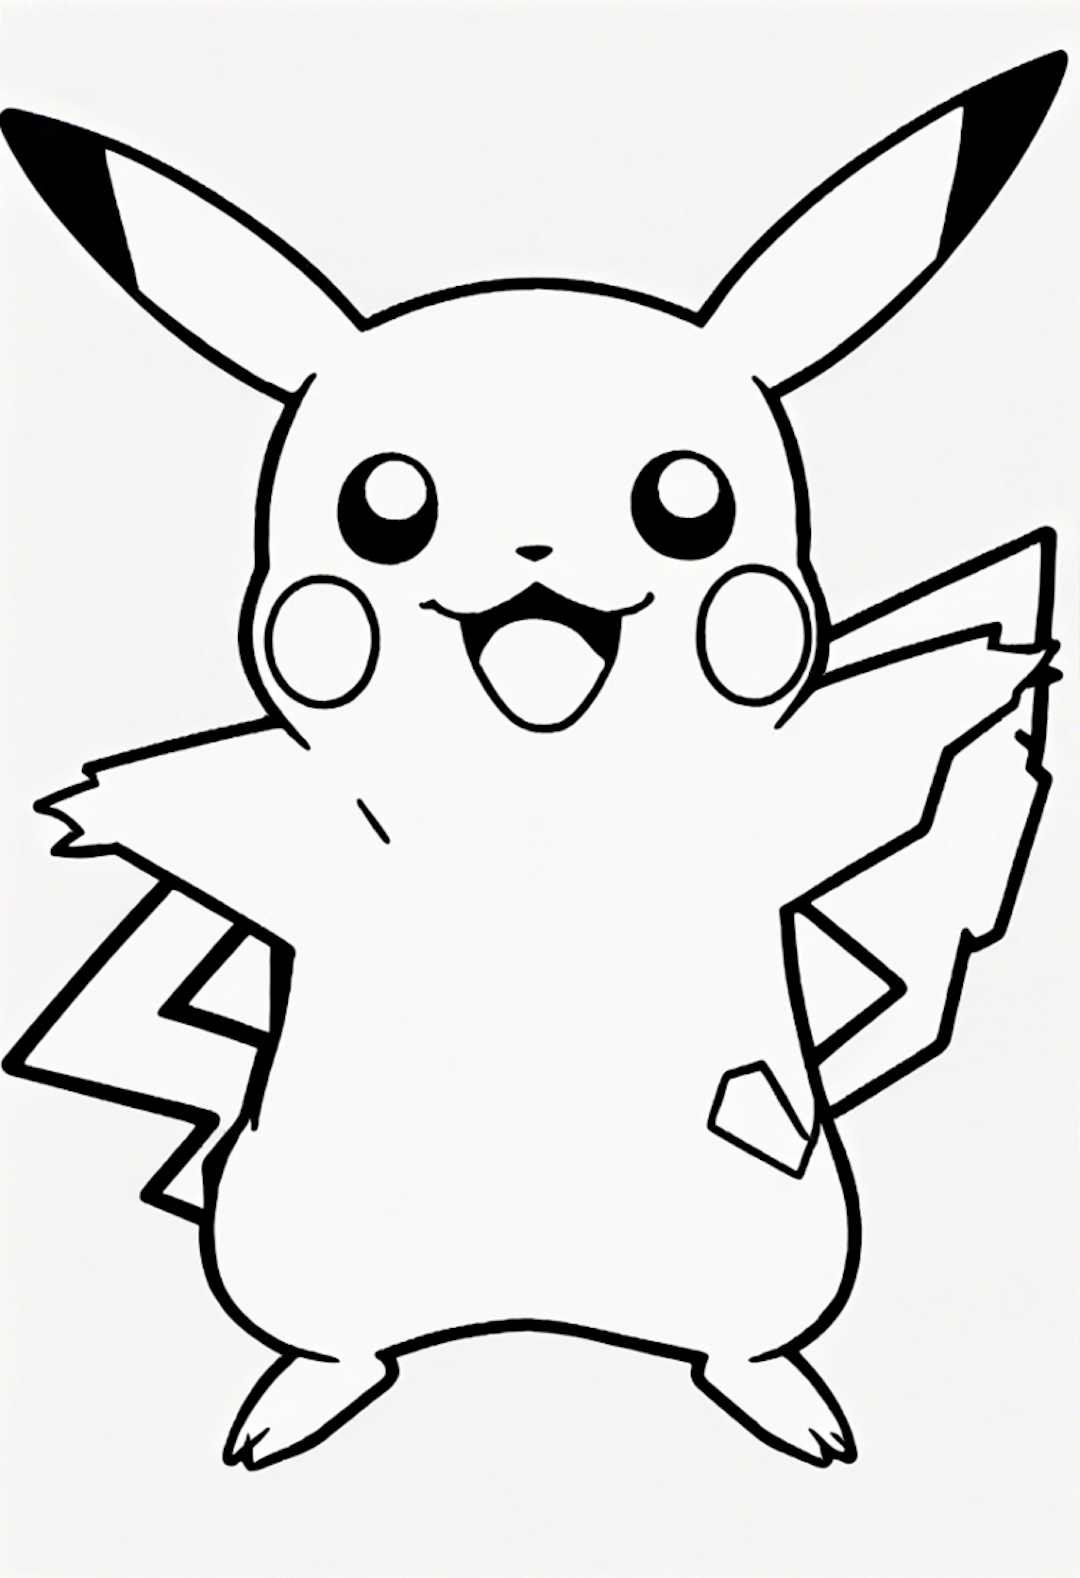 Lonely Pikachu coloring pages